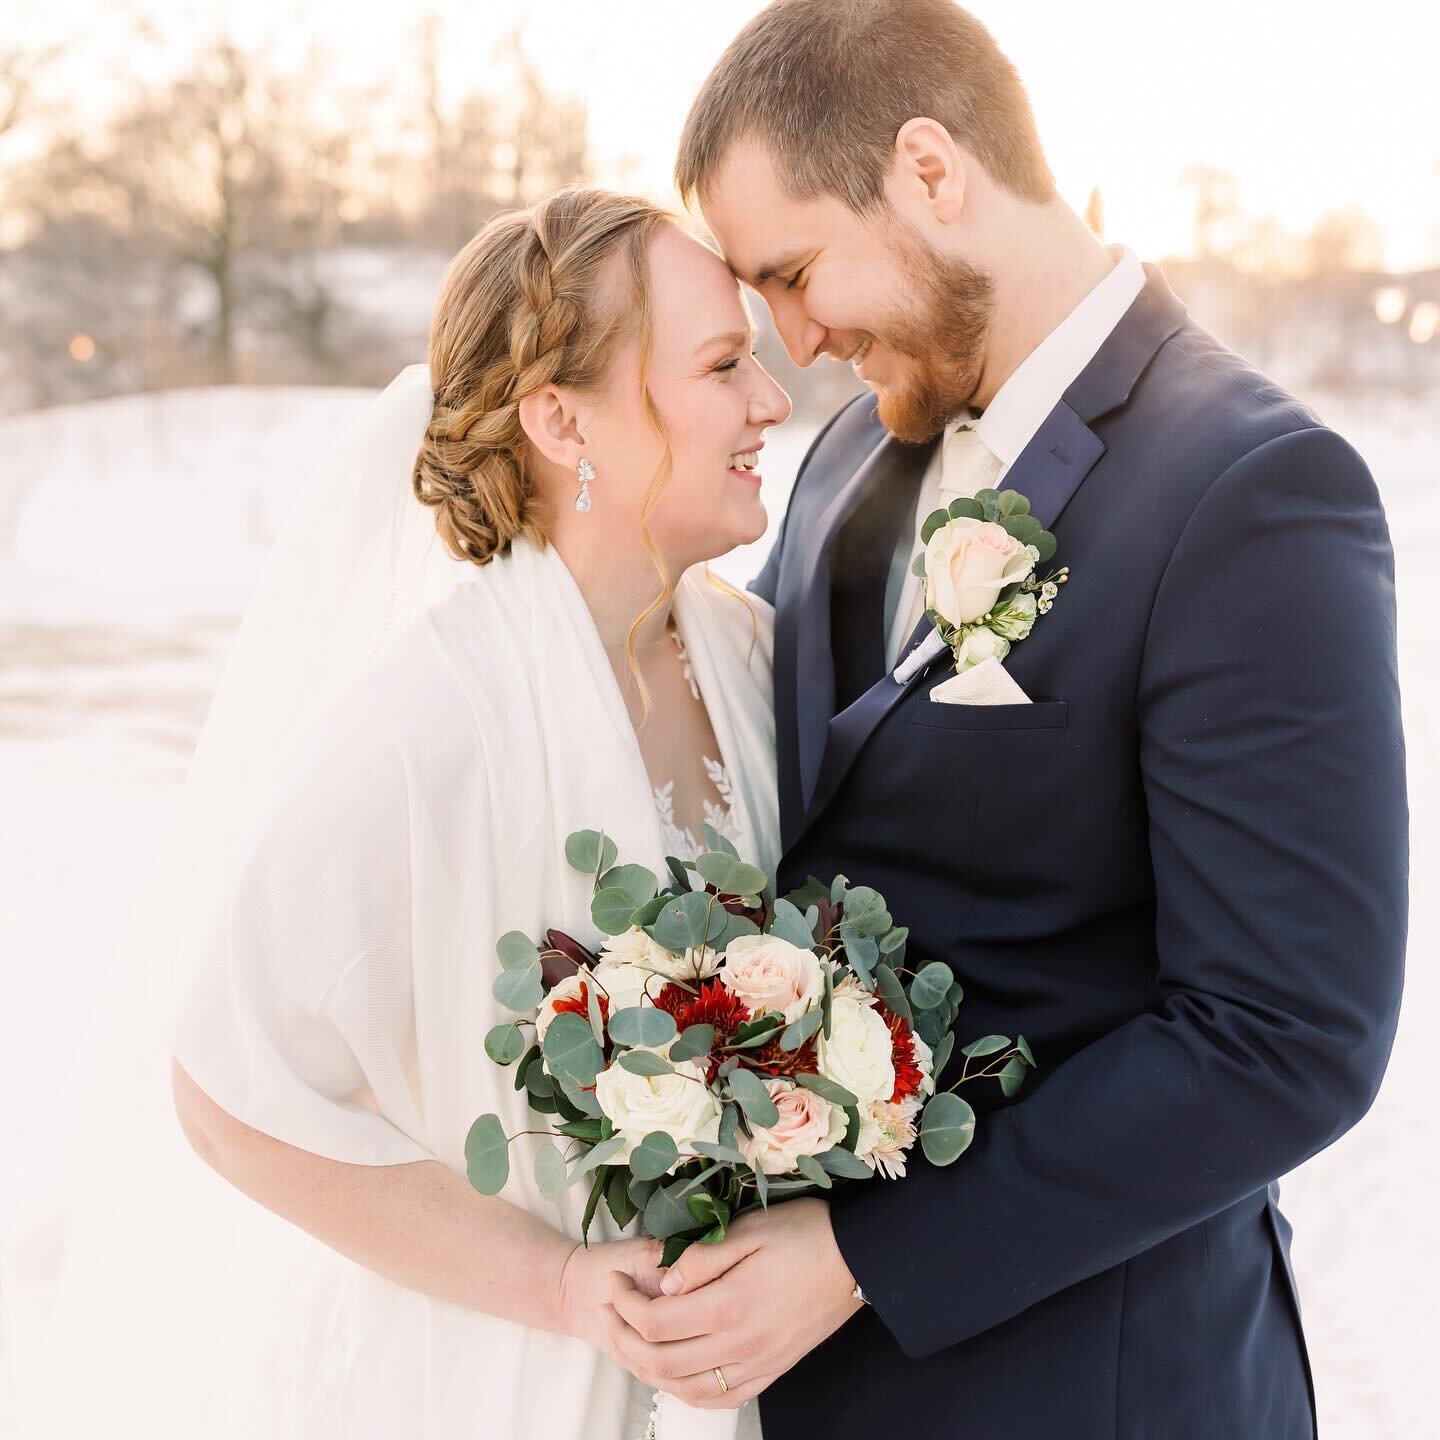 Erica + Brian
January 20, 2024

What a beautiful day celebrating this wonderful couple. I&rsquo;ve always admired these two, but their love is an inspiration to witness. From the beautiful Latin Mass and ceremony, to their generous reception. These t